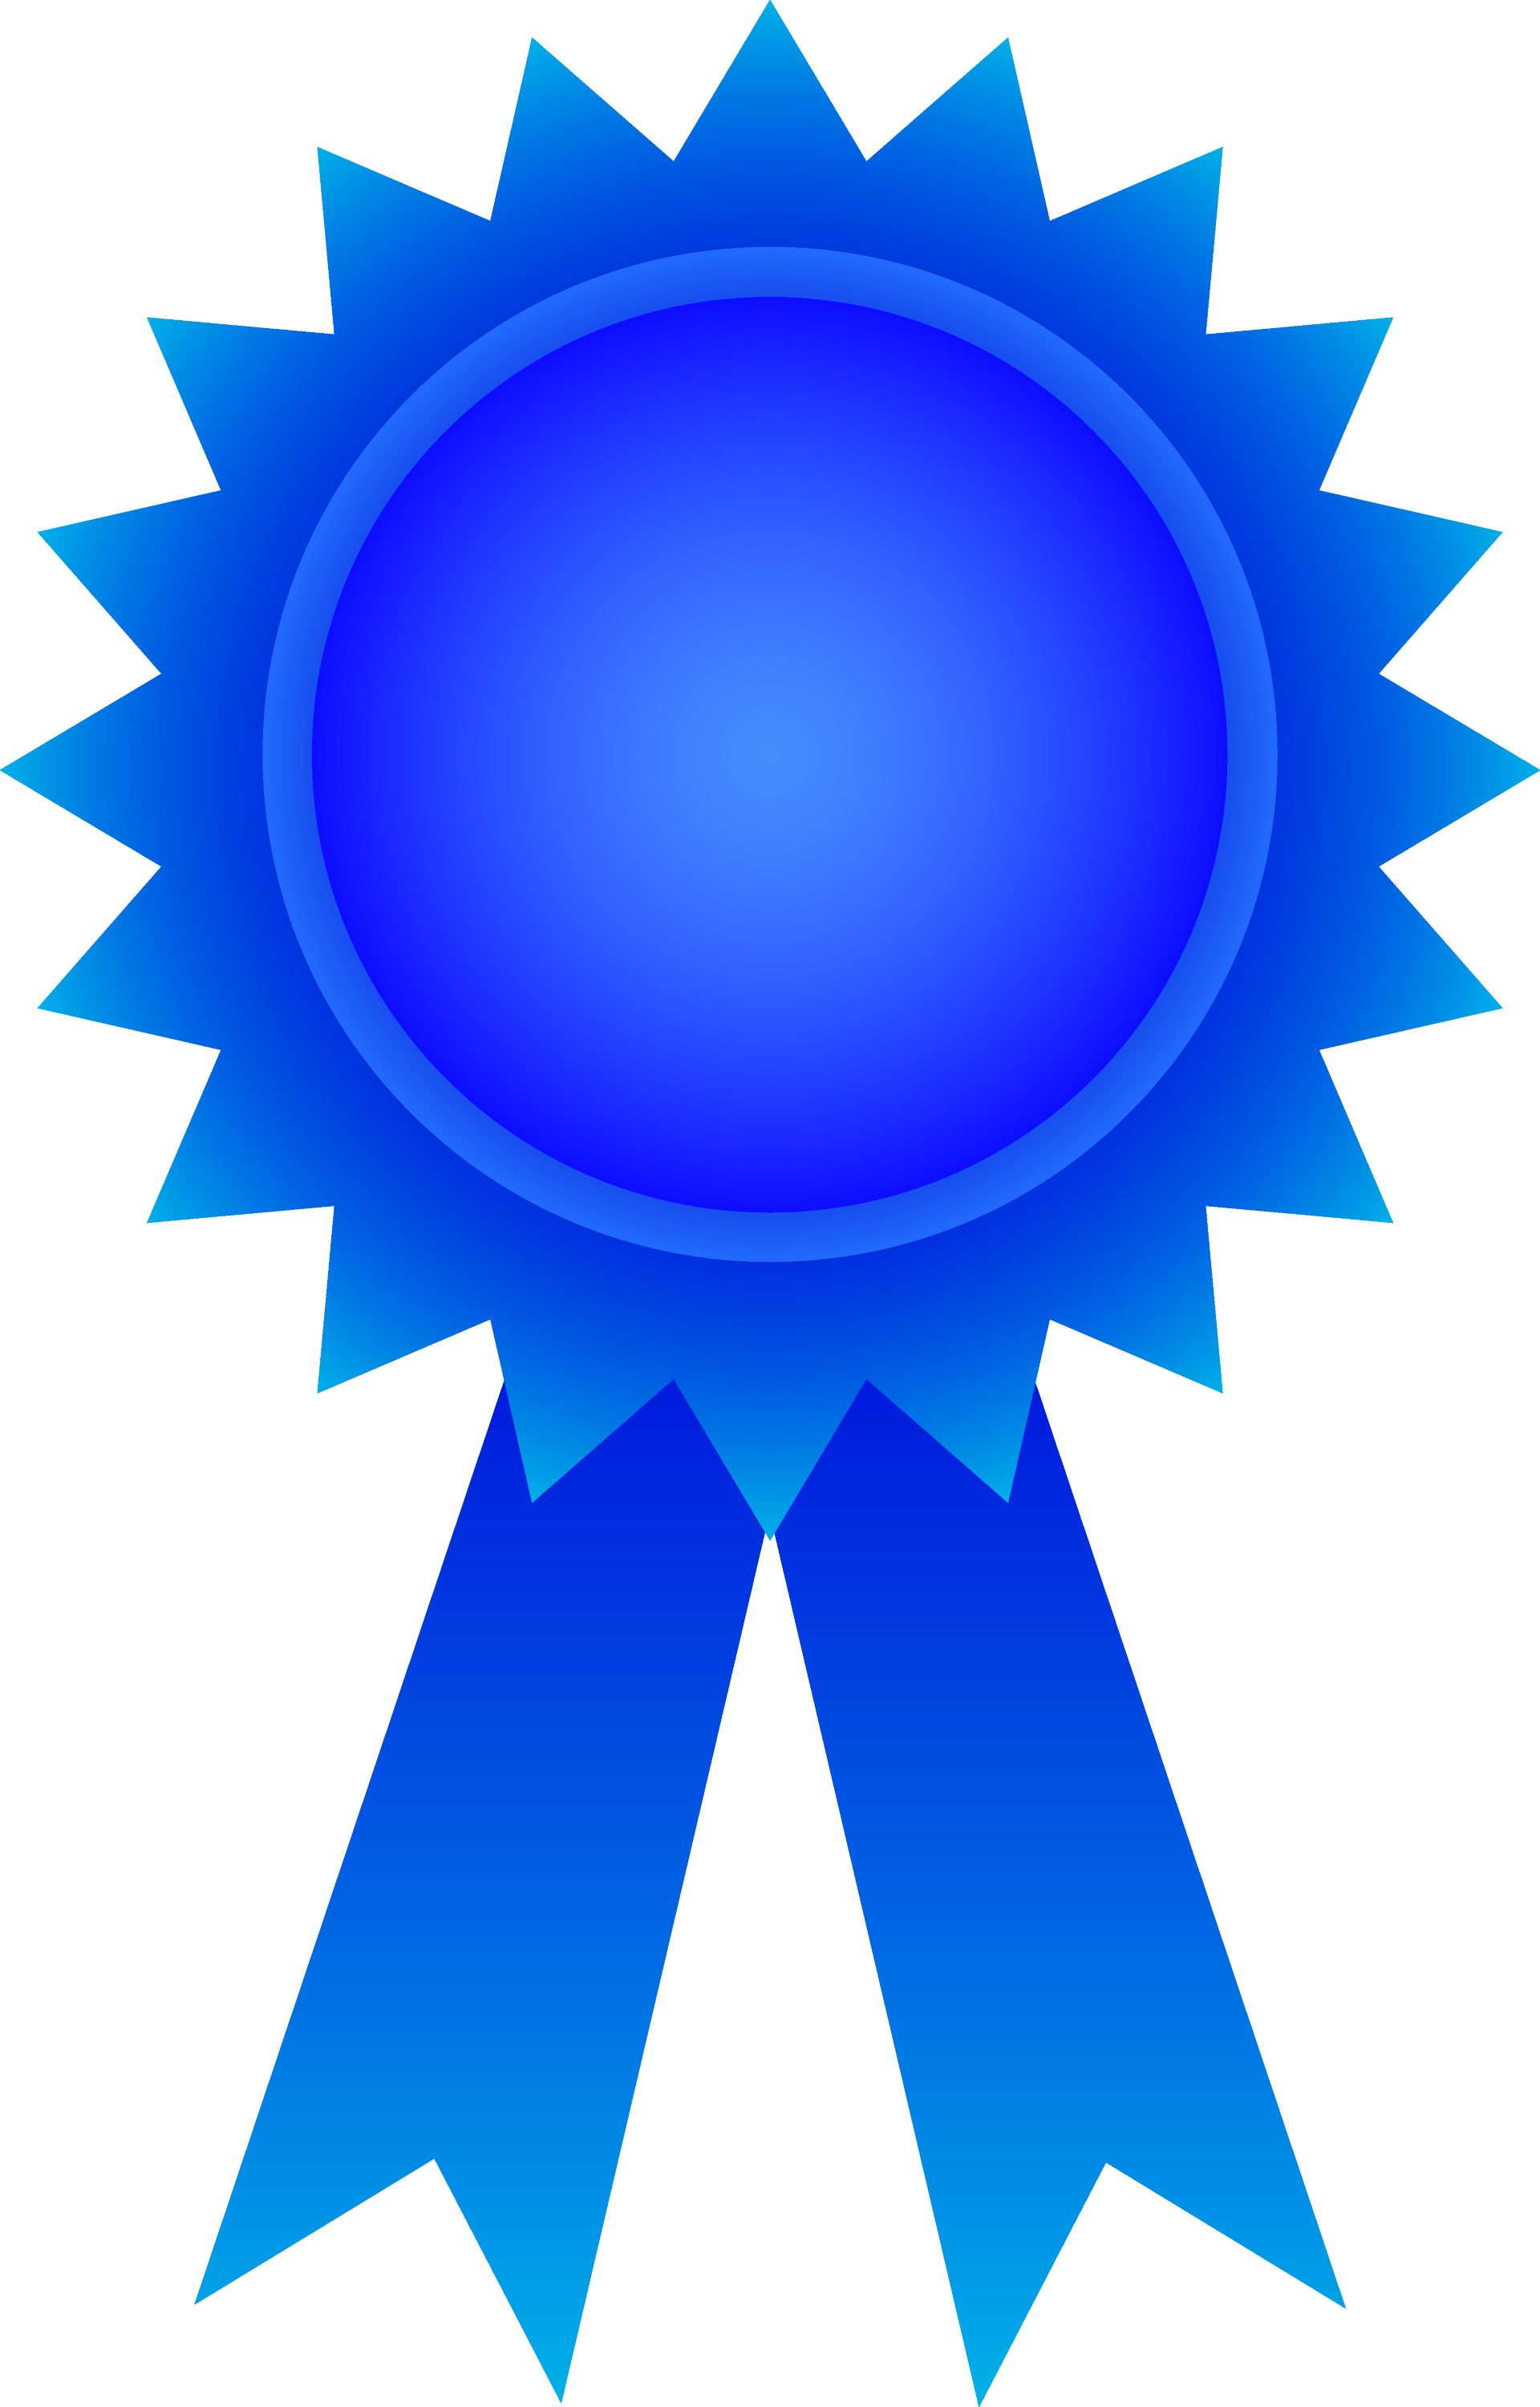 medals clipart free - photo #32